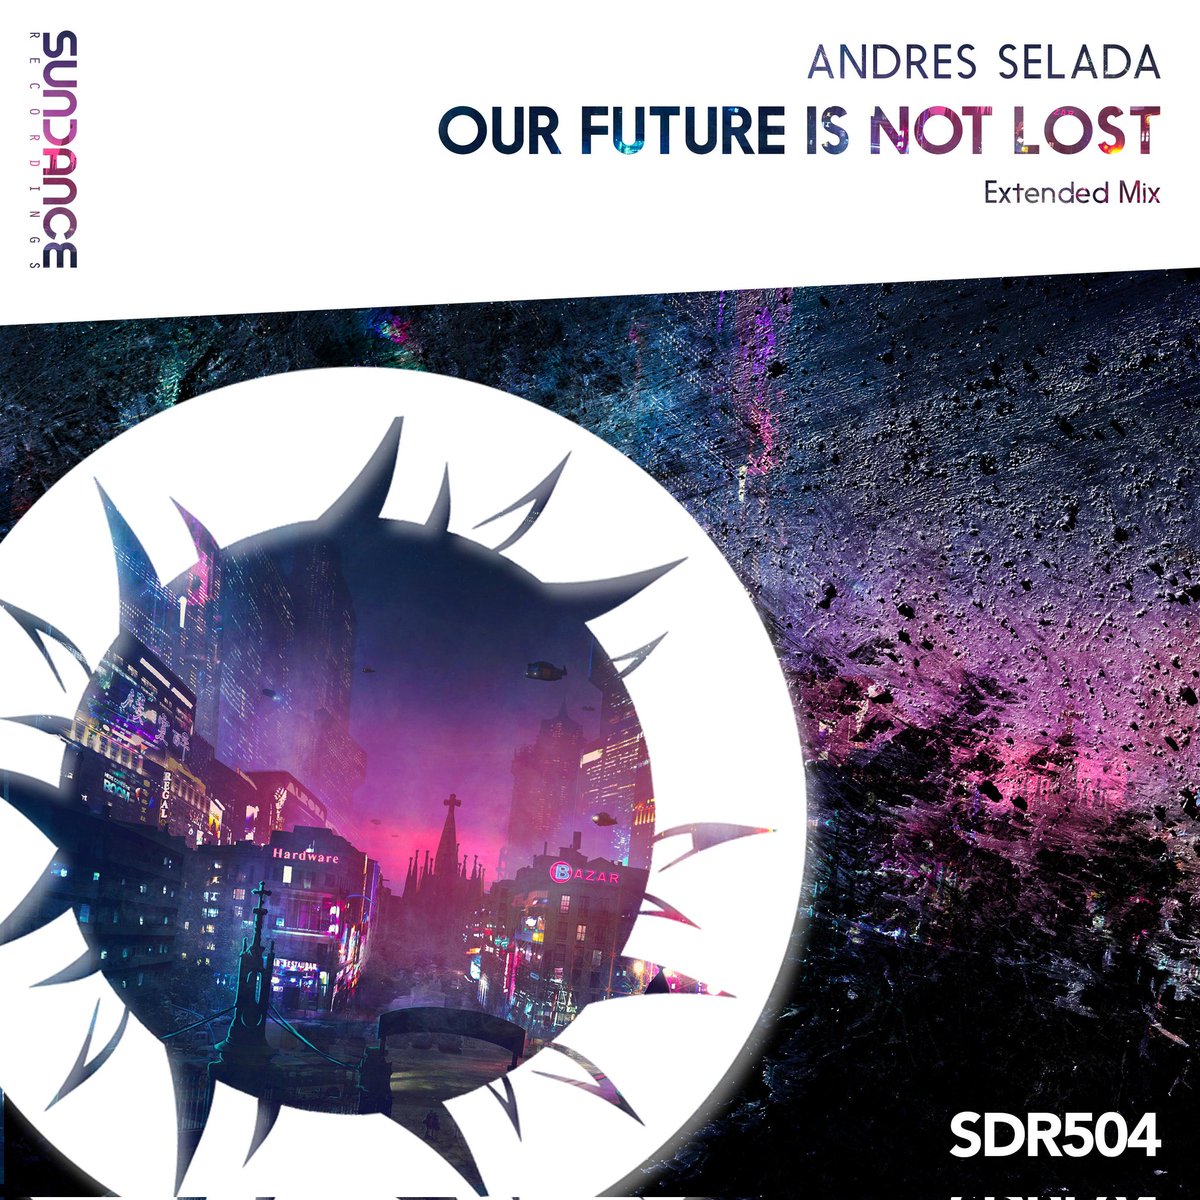 Andres Selada 'Our Future Is Not Lost' Exclusive Release : 29th October, 2021 Full Audio ► fanlink.to/sdr504 Official Video ► fanlink.to/sundancerecord… #sundancerecordings #andresselada #uplifting #rance #promo 4th Week, October 2021 sundancerecordings.com